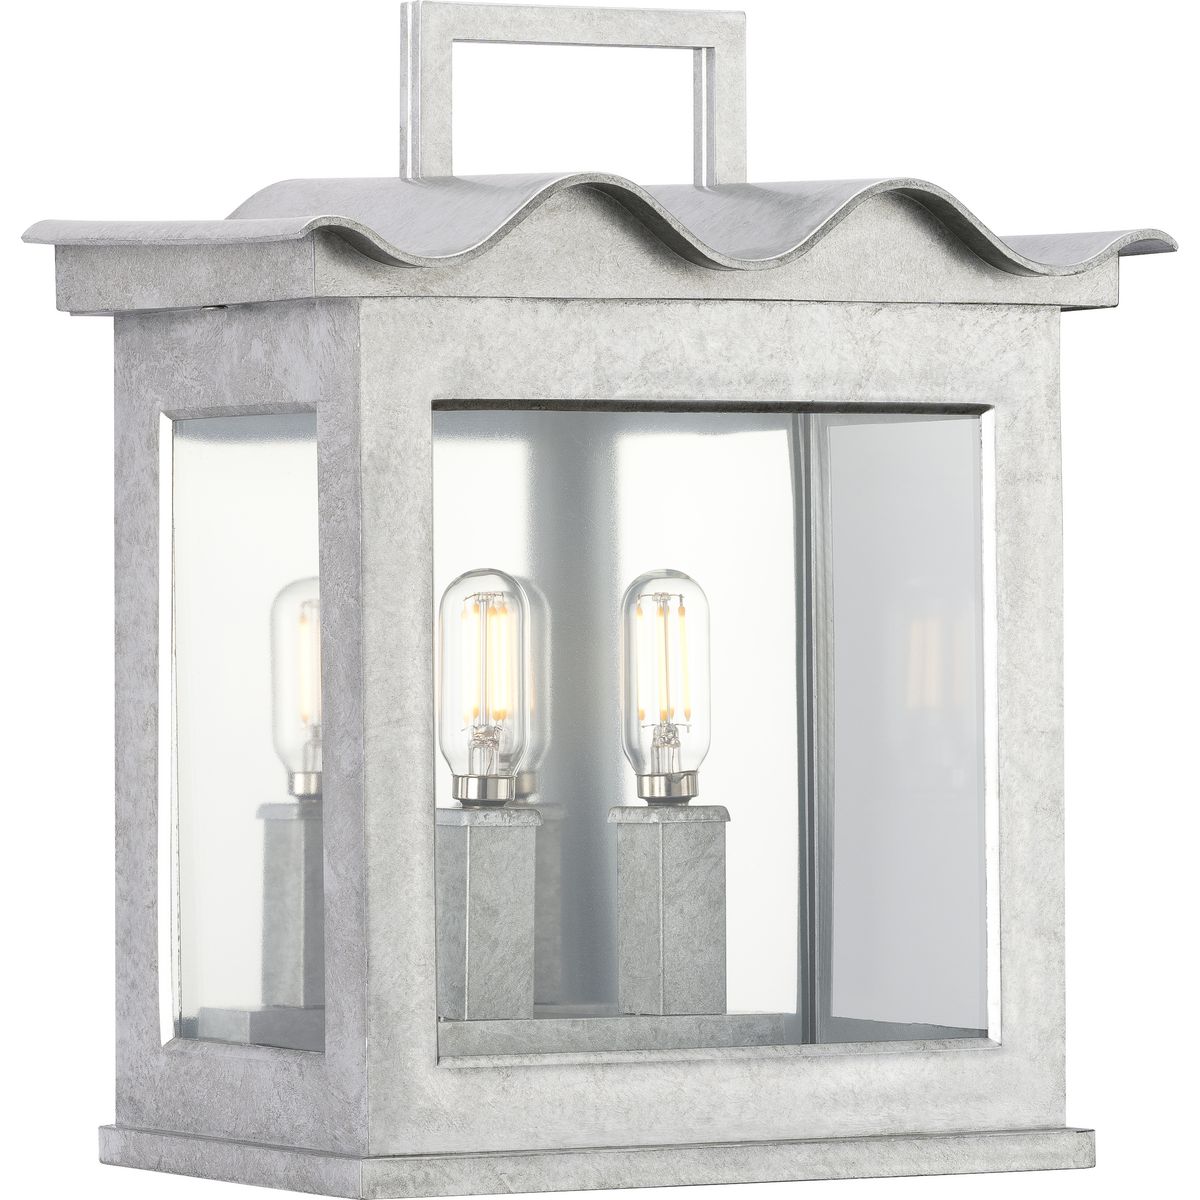 POINT DUME® by Jeffrey Alan Marks for Progress Lighting Seamoor Galvanized Finish Outdoor Wall Lantern - Wet Location Listed